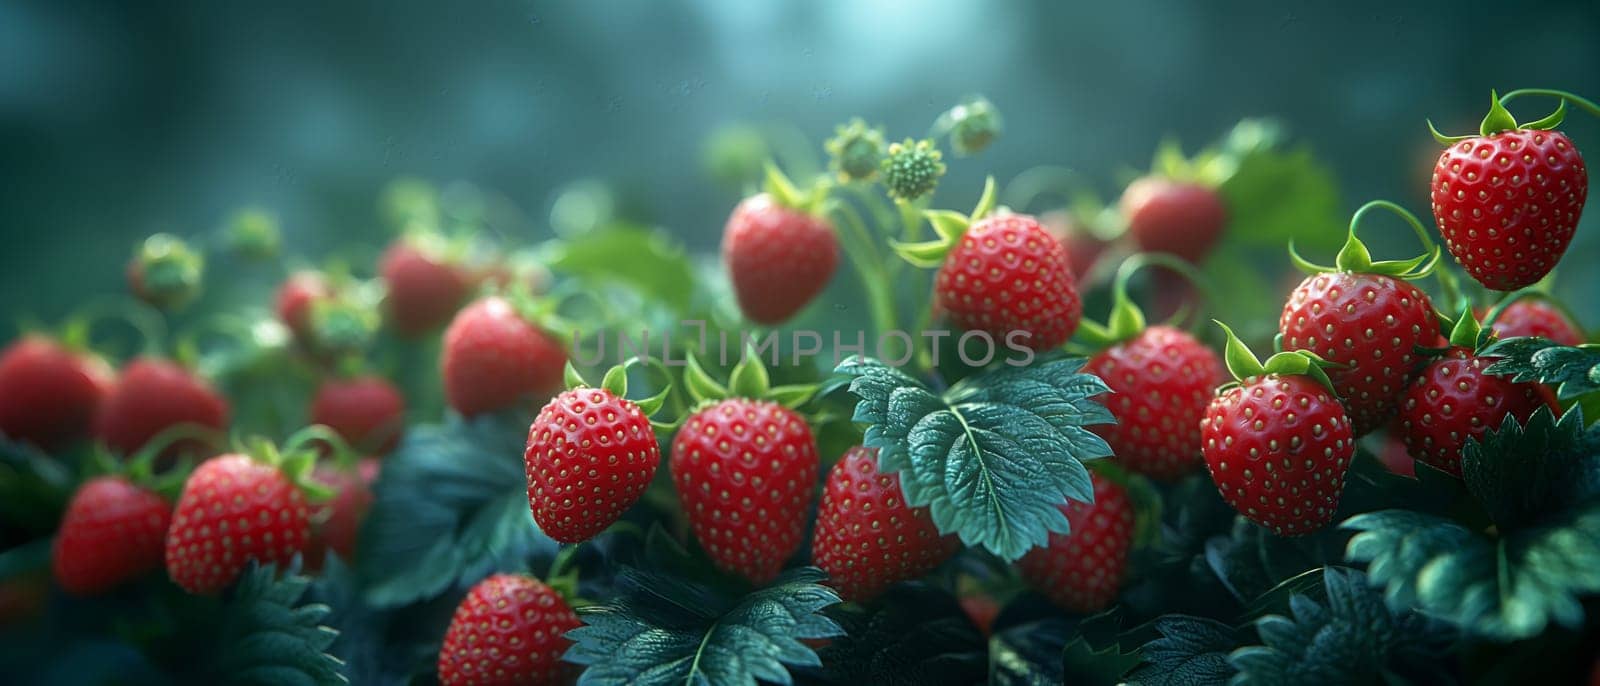 Ripe strawberries with leaves on a dark background. by Fischeron